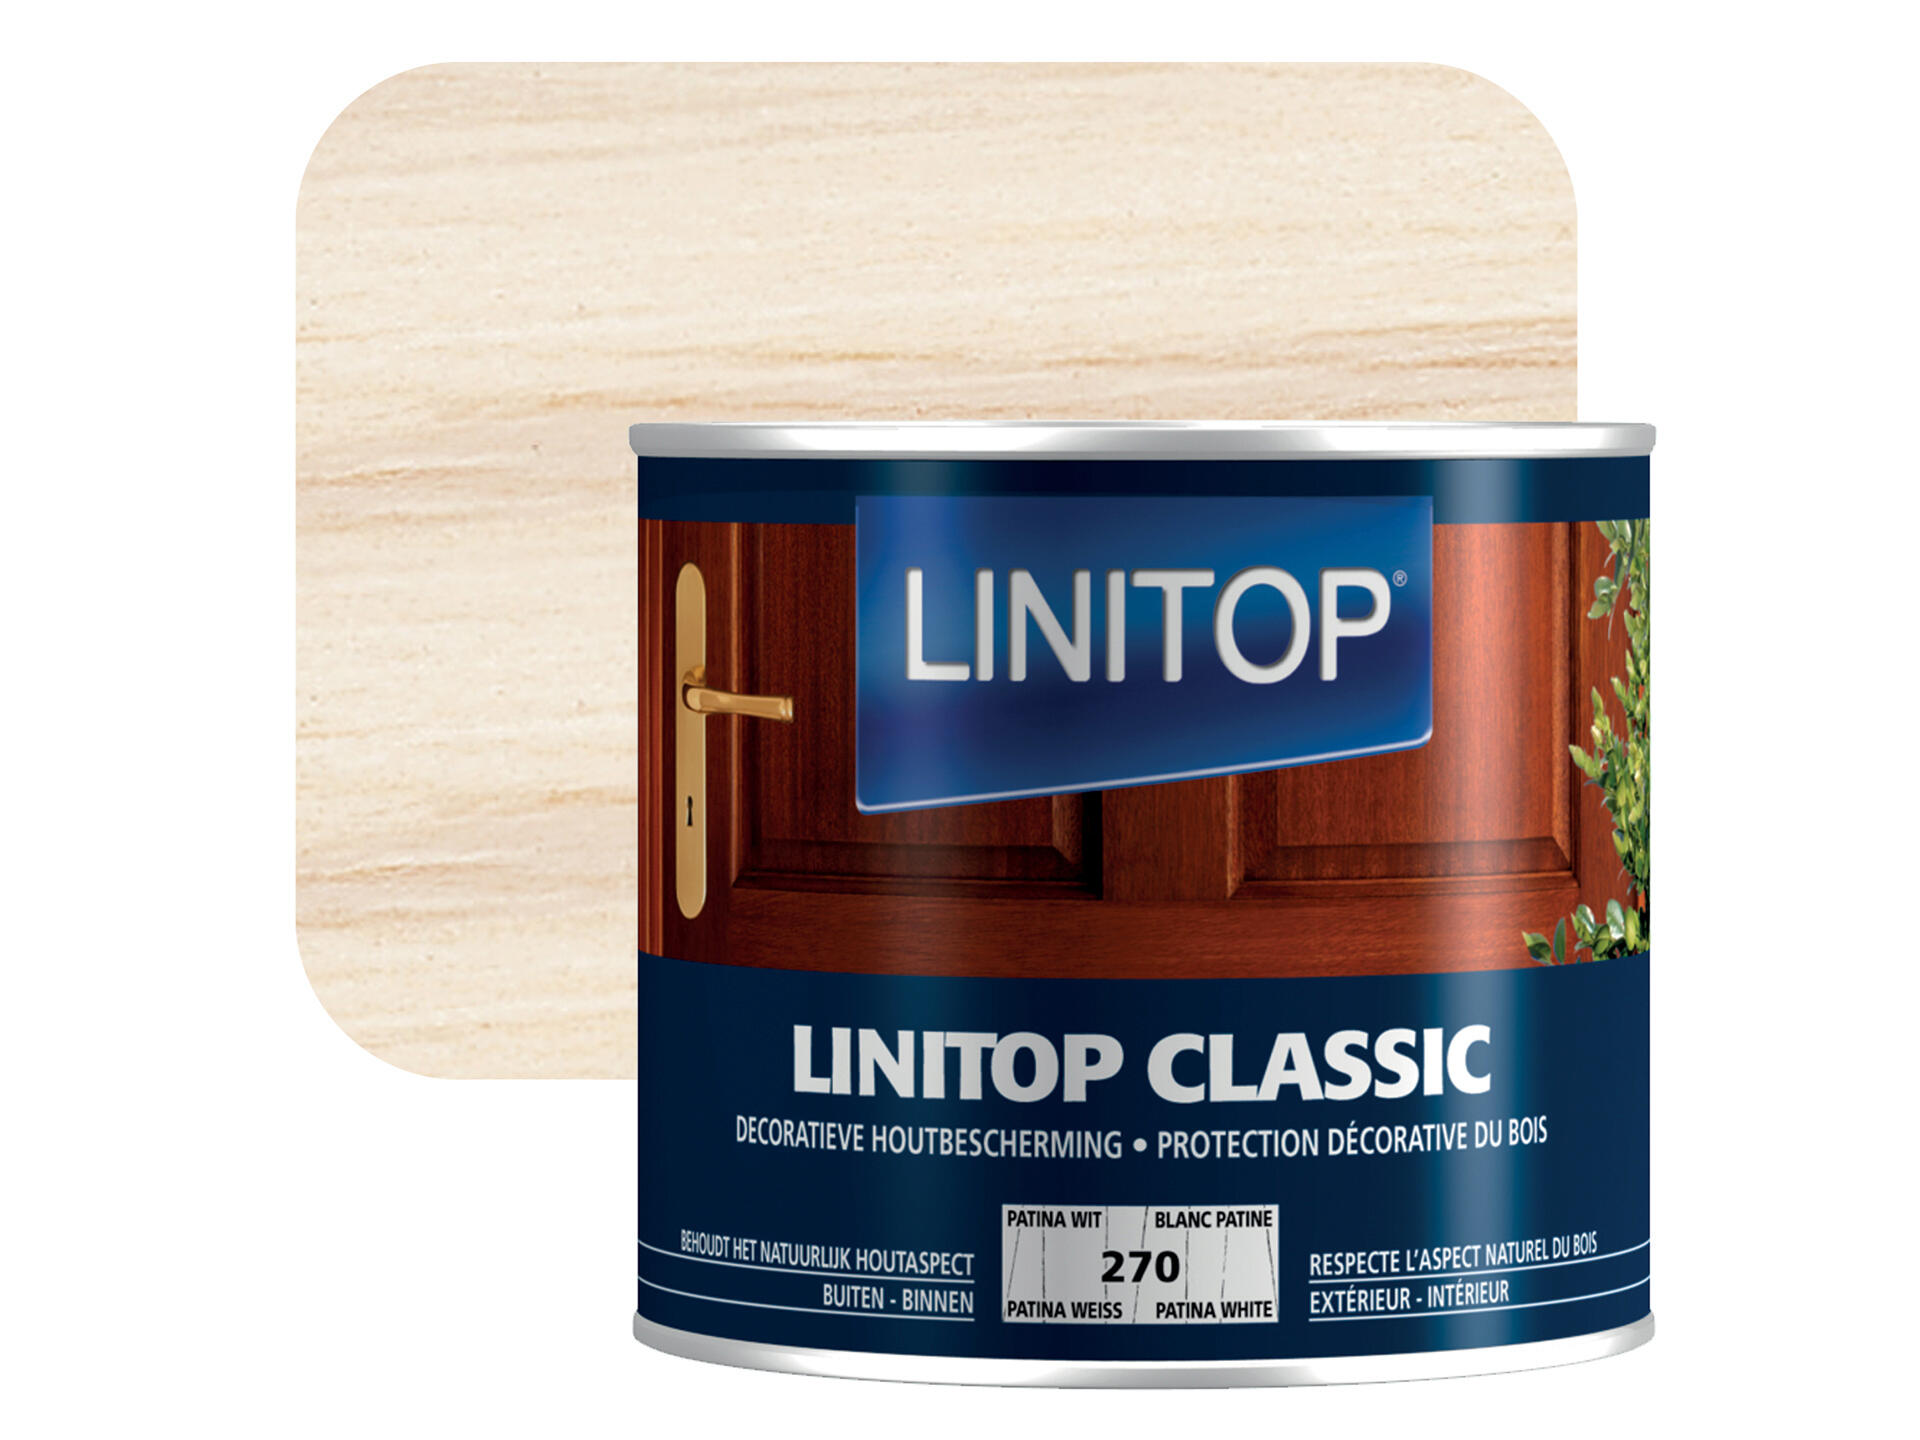 Linitop Classic beits 0,5l patina wit #270